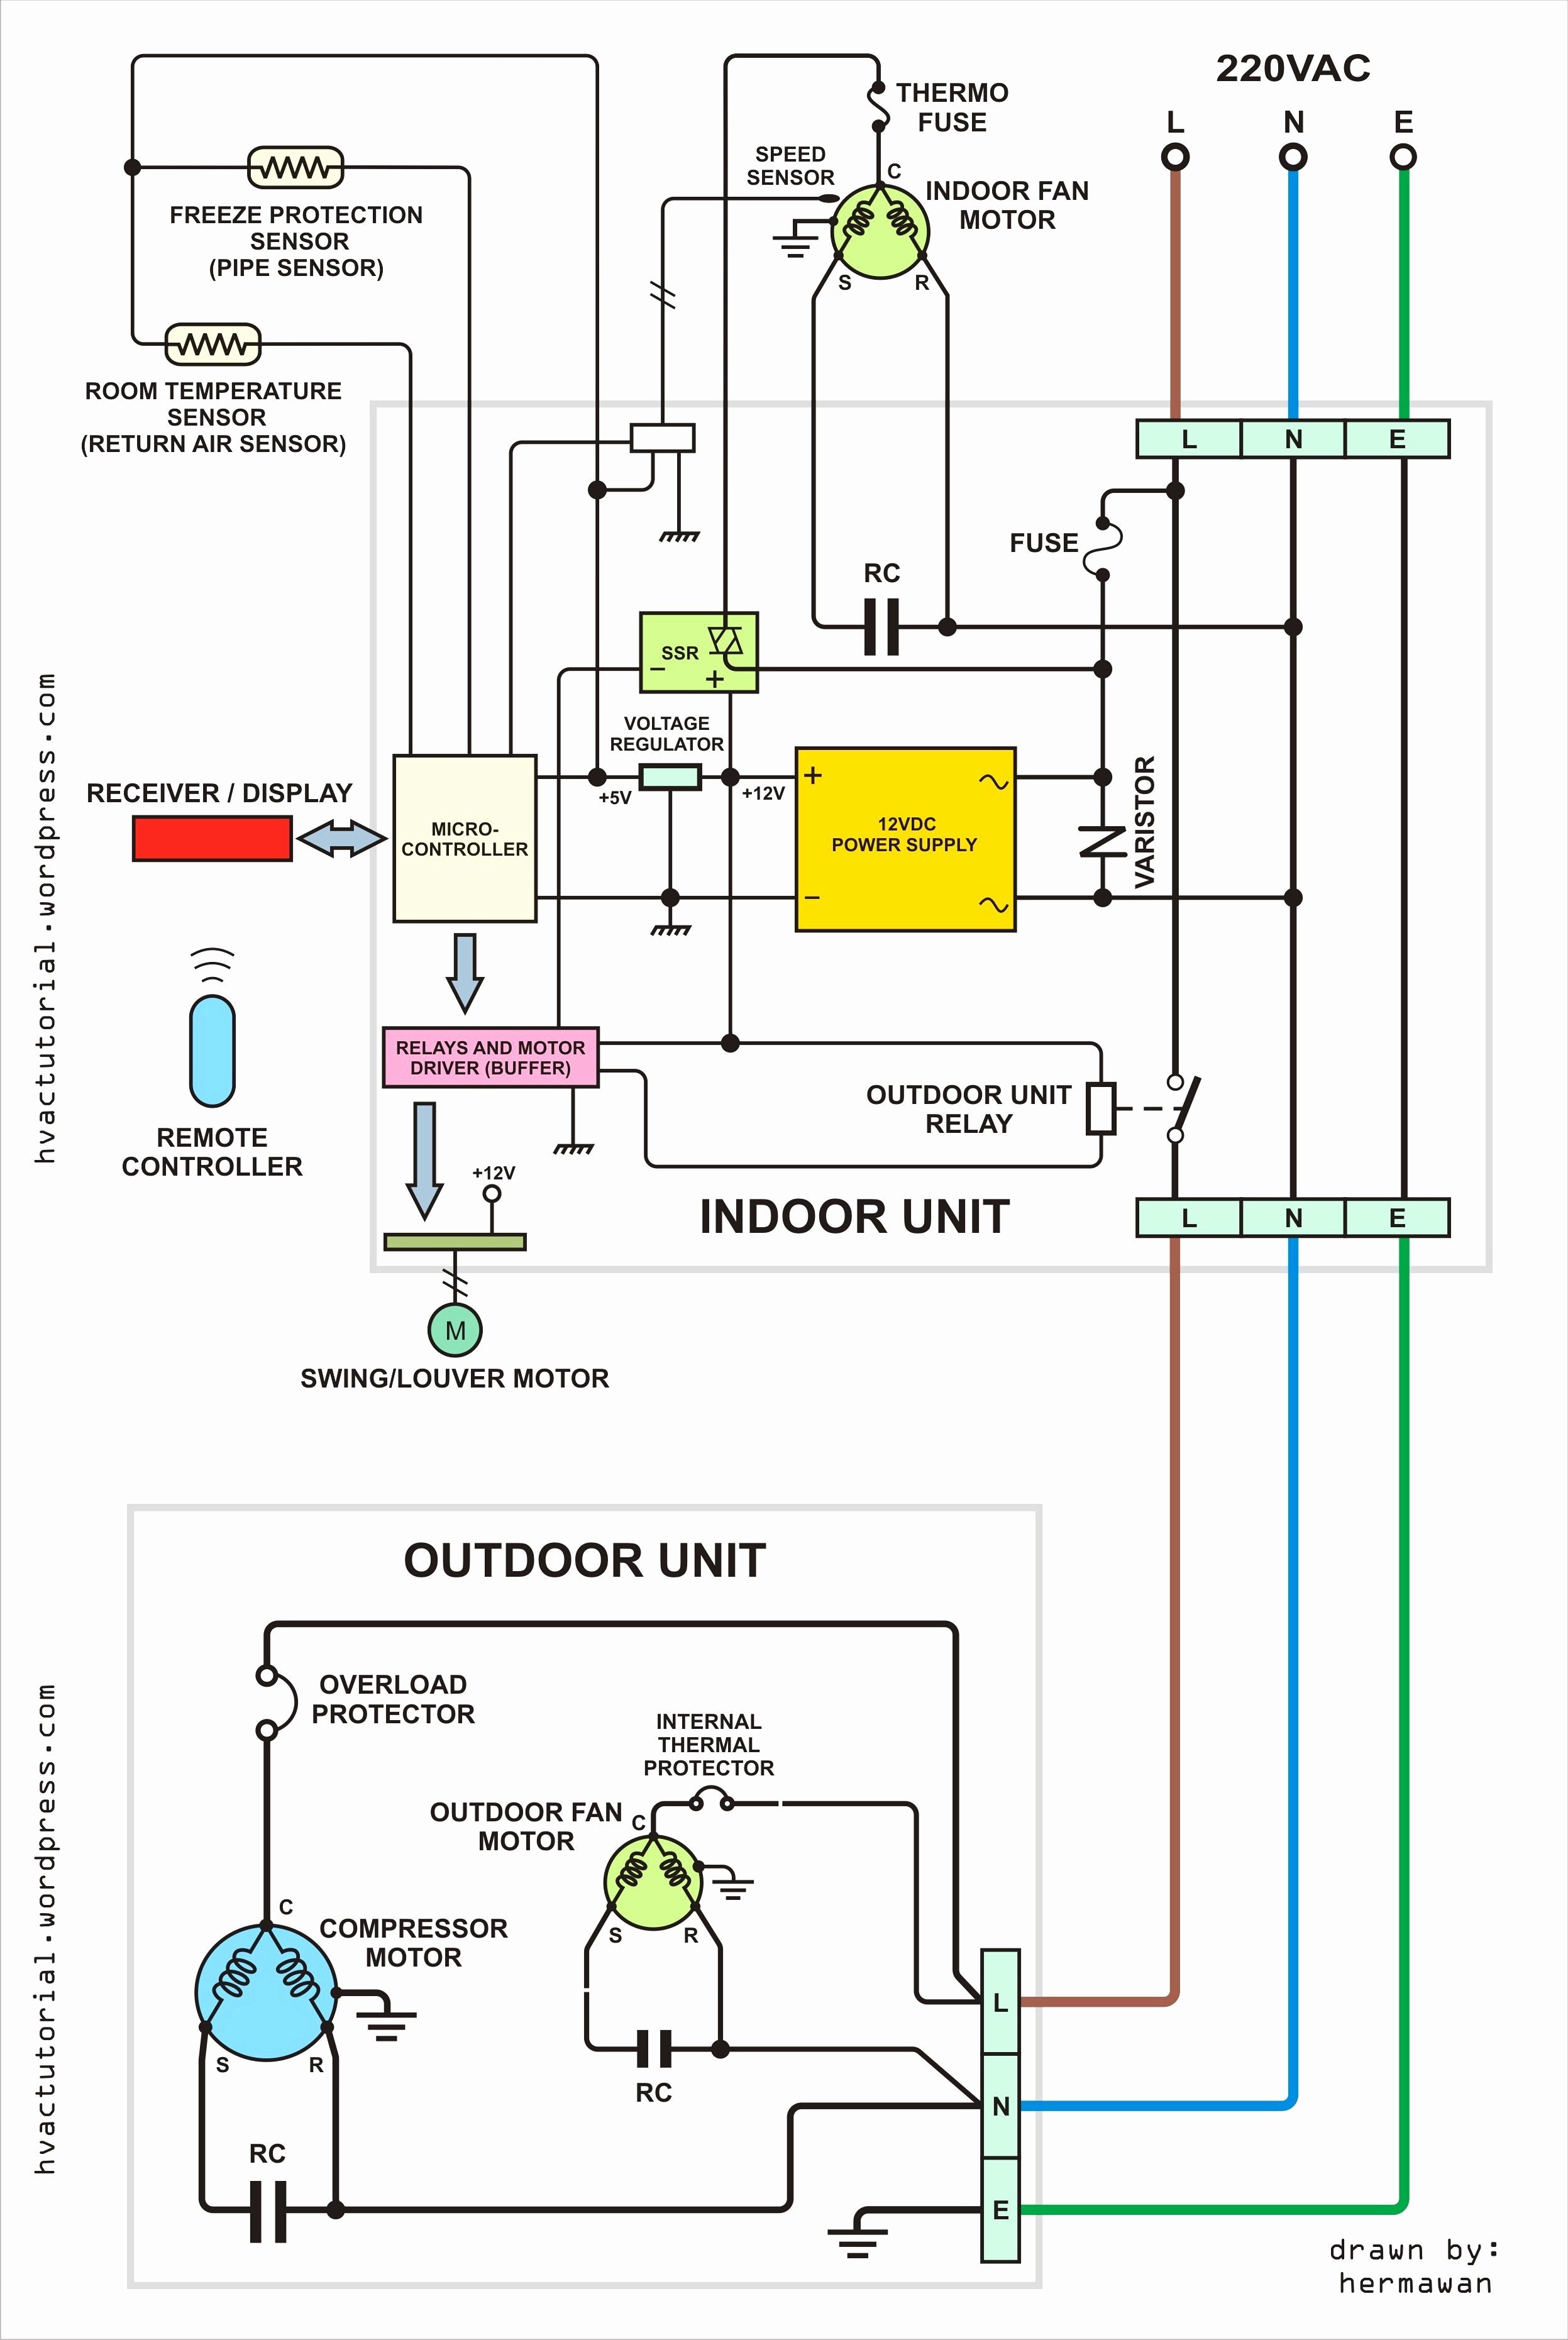 Cooling Fan Wiring Diagram 2002 Jeep Liberty Diagram] Freightliner Ac Wiring Diagram Full Version Hd Of Cooling Fan Wiring Diagram 2002 Jeep Liberty